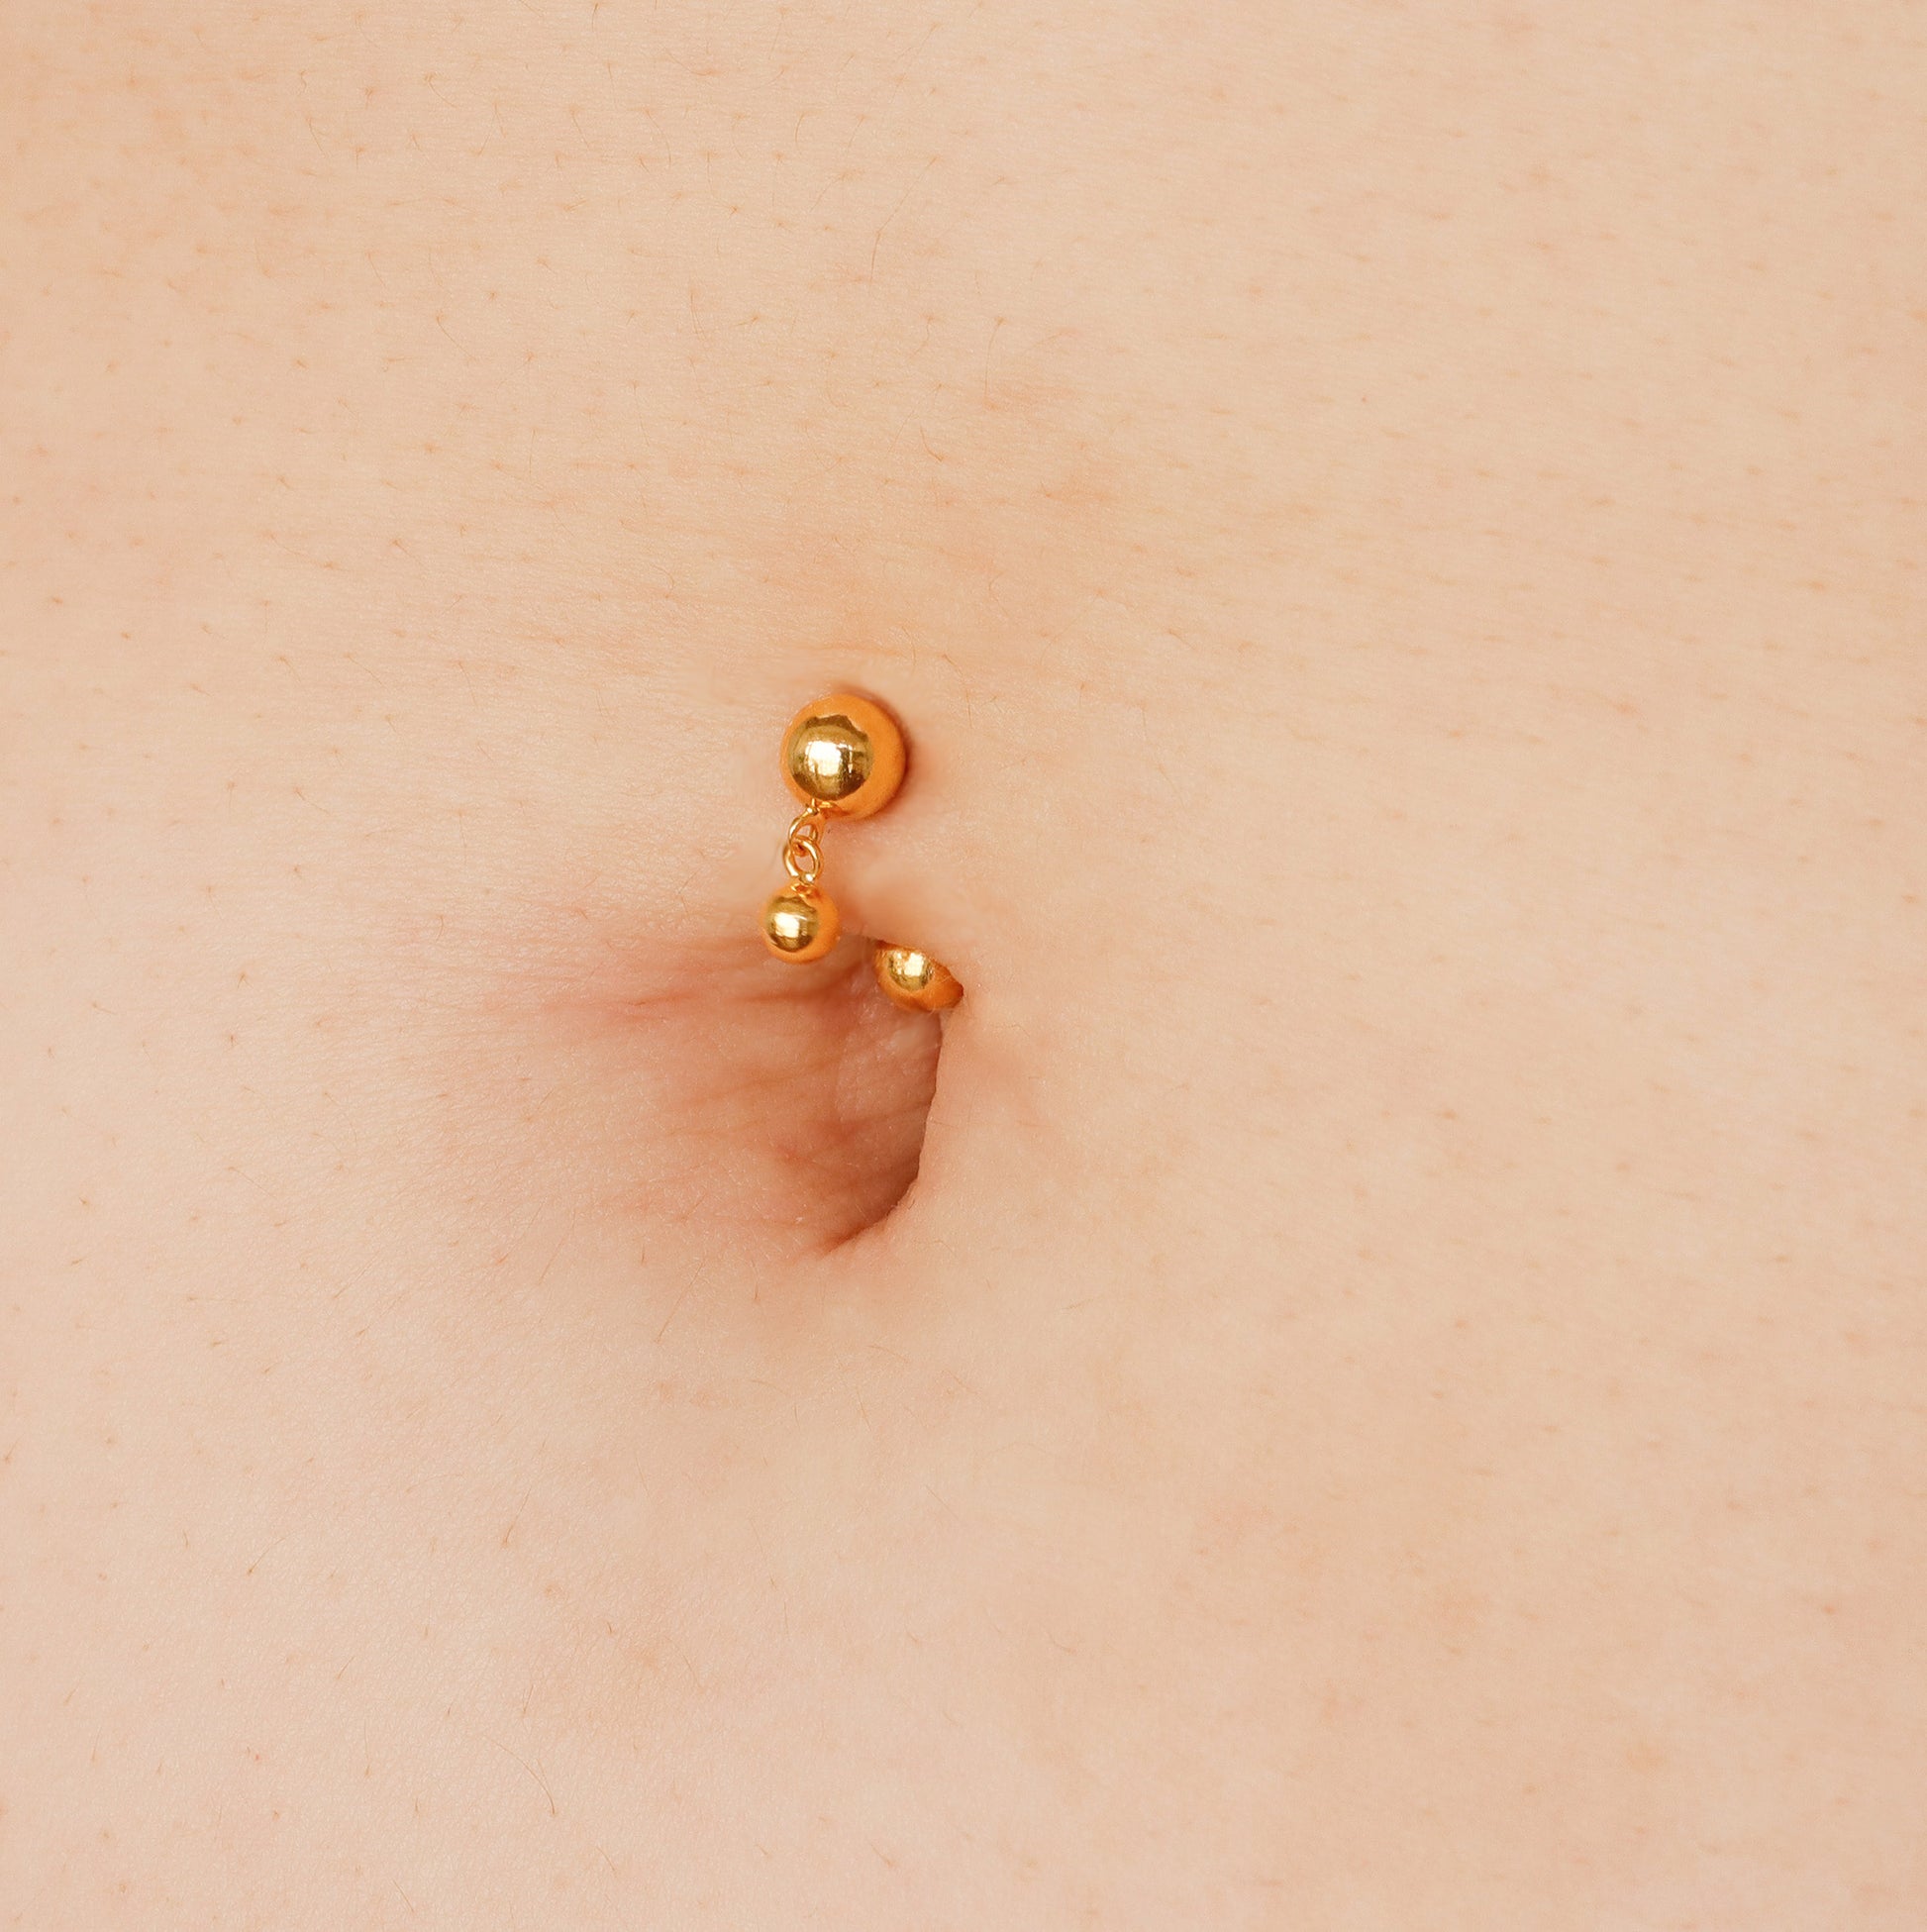 Vermeil | 925 Silver 24k Gold Coated 14G Petite Ball Dangle Reverse Belly Ring | 6mm 1/4" 8mm 5/16" 10mm 3/8" - Sturdy South